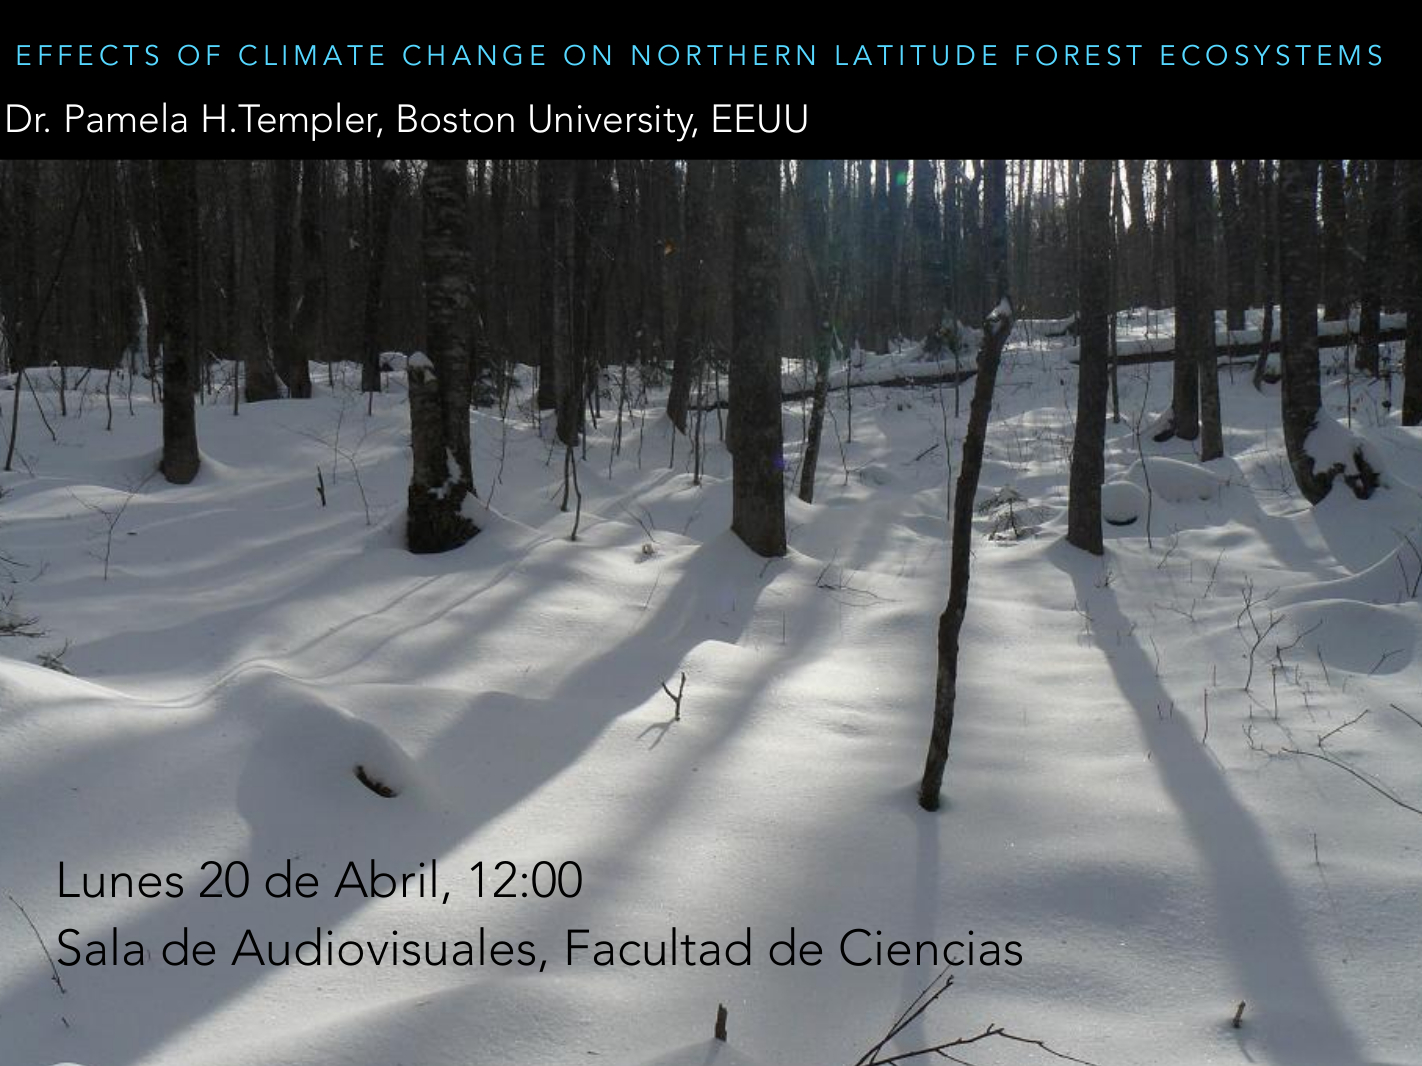 Effects of climate change on northen latitude forest ecosystems